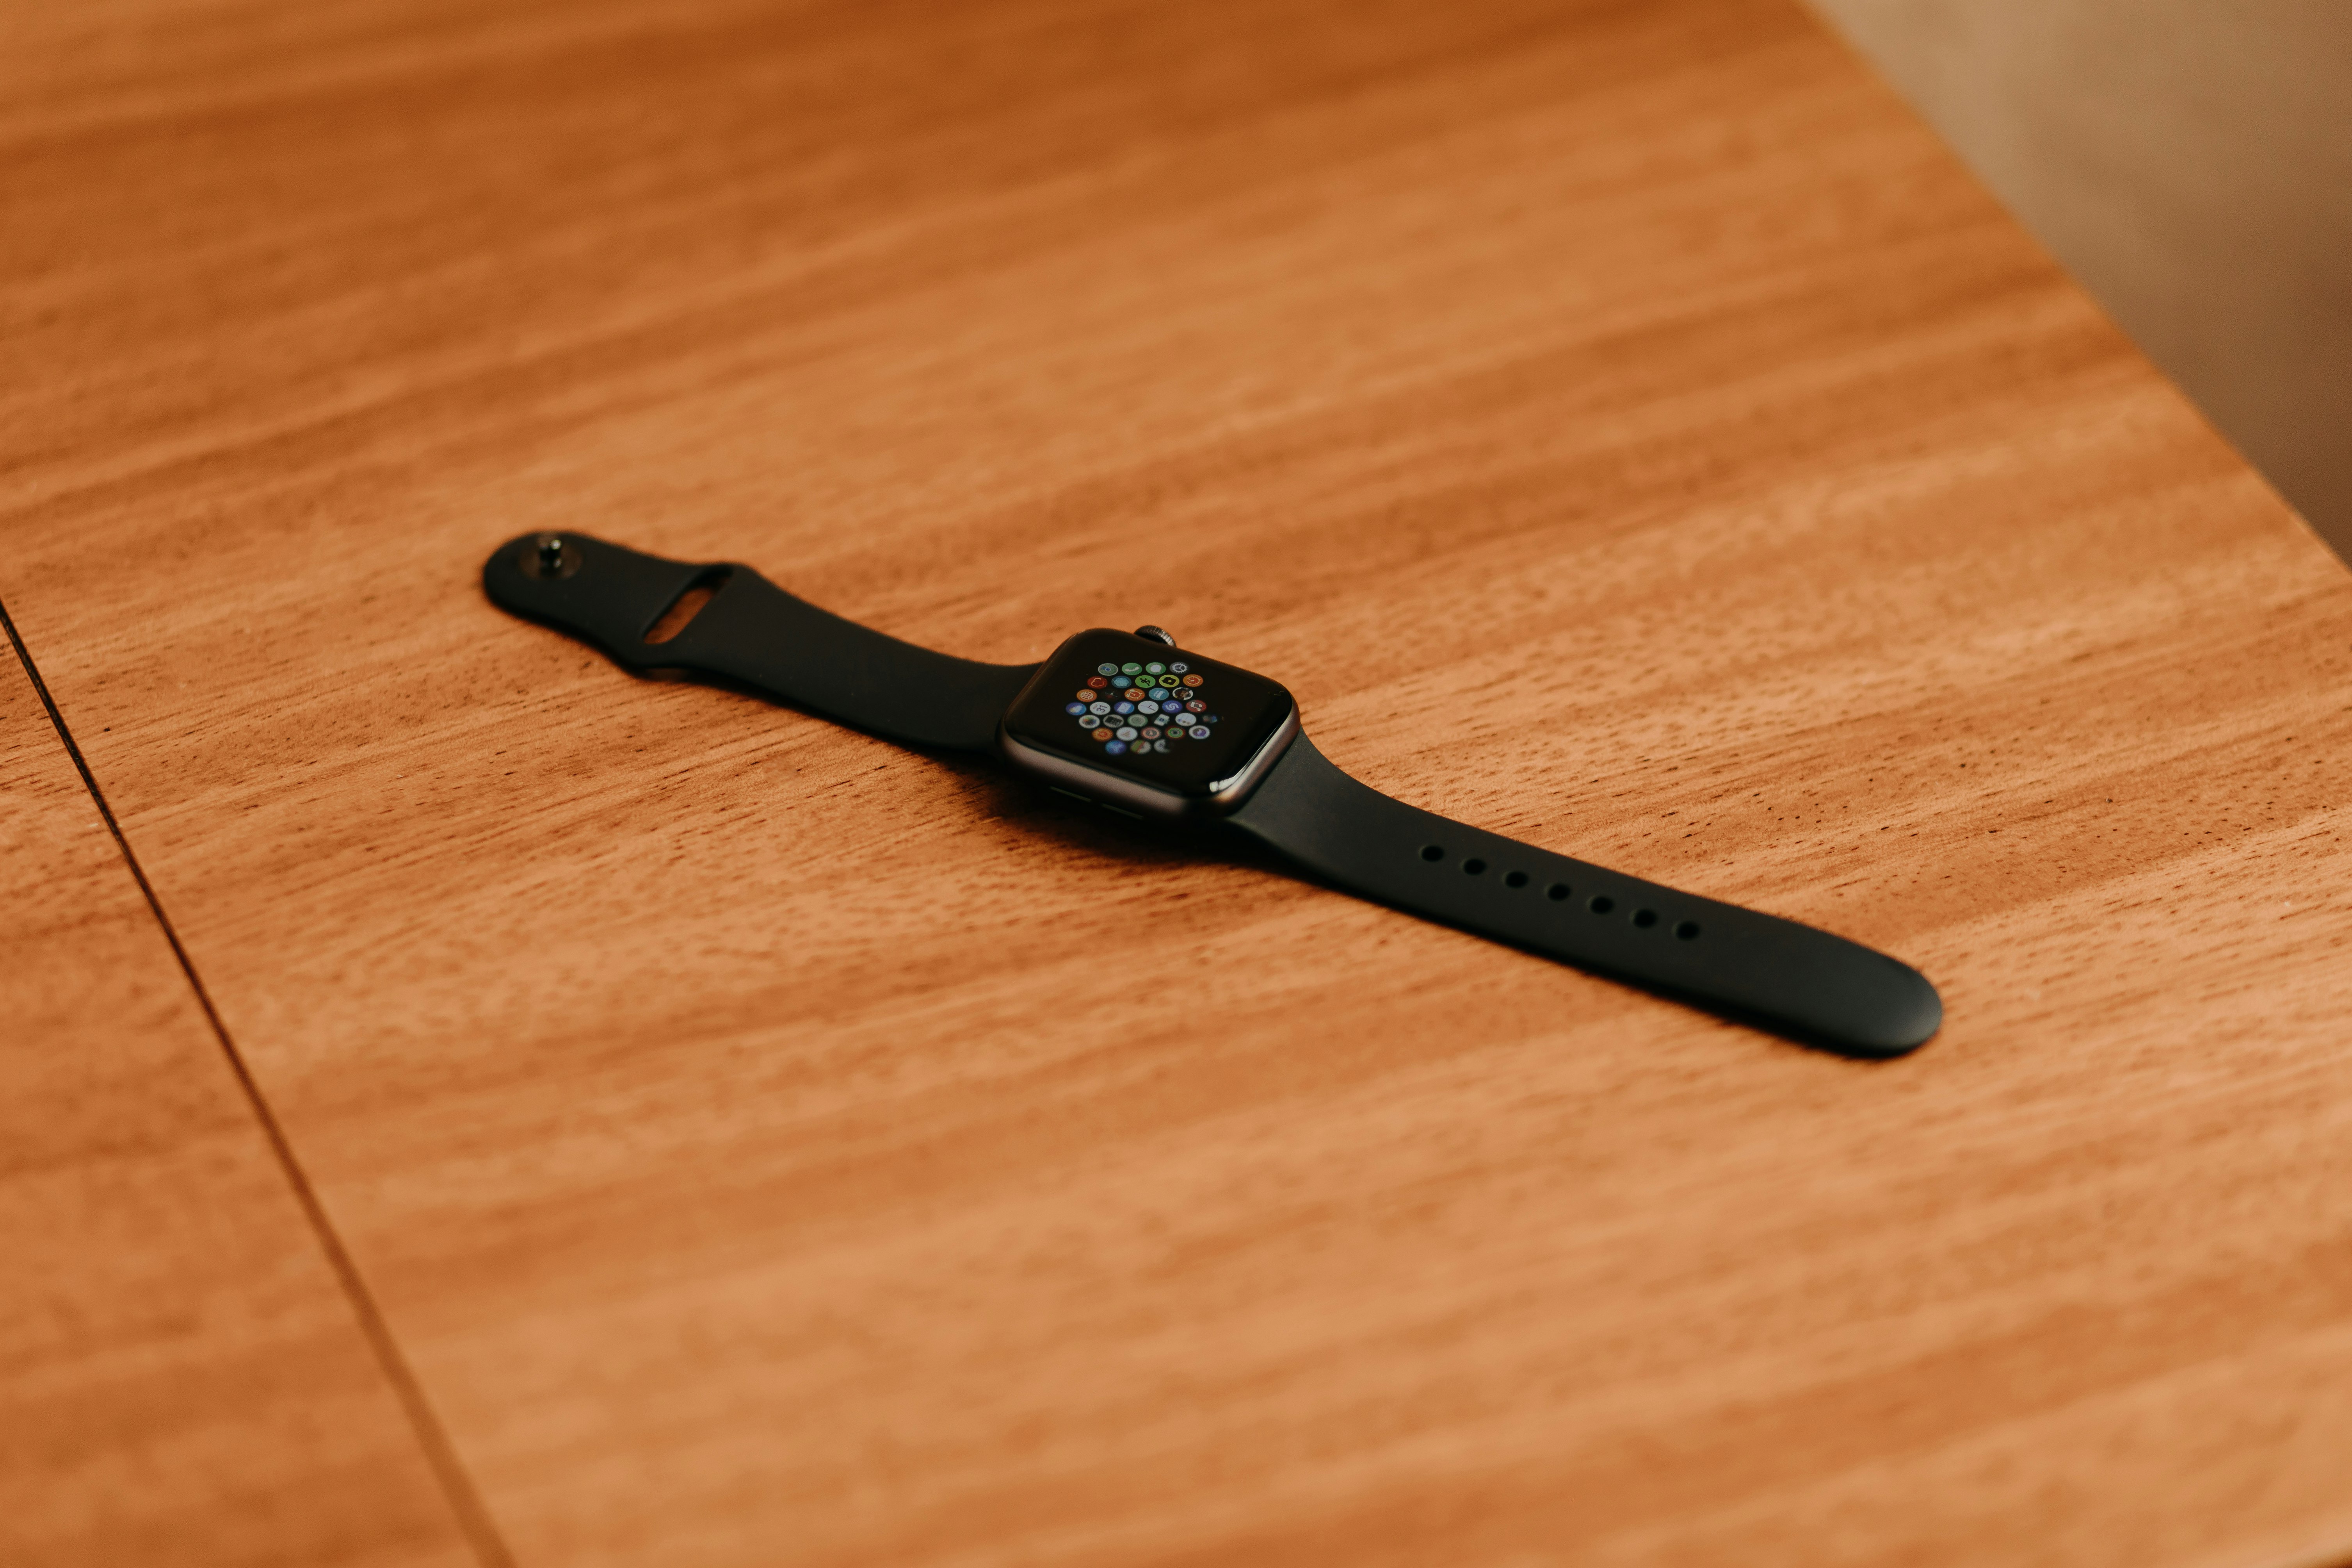 black apple watch with black sport band